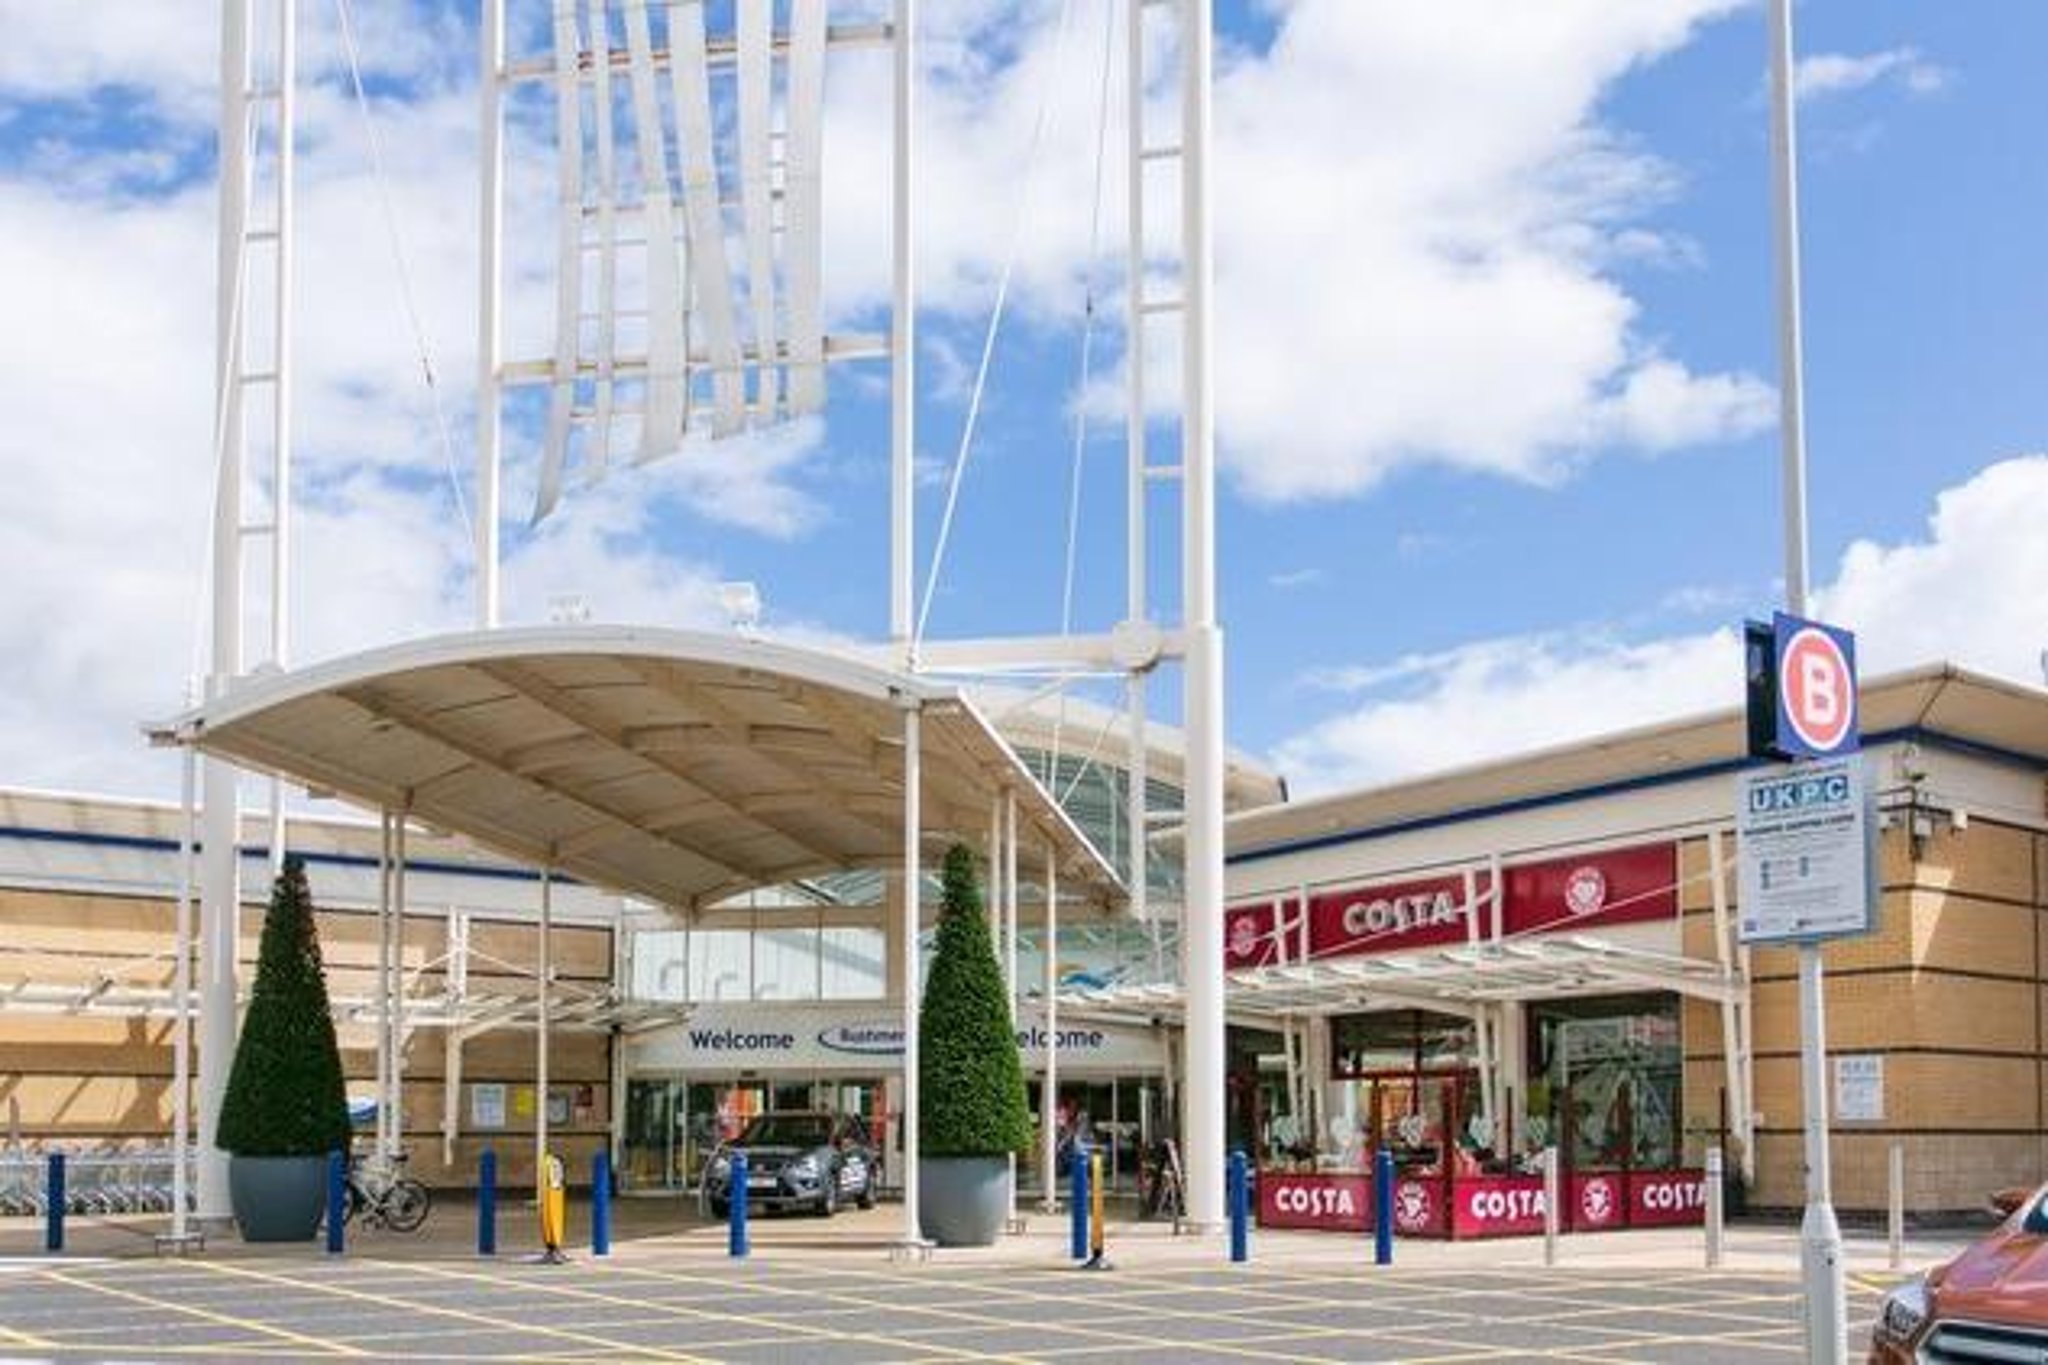 Rushmere Shopping Cenre is 'vital for economy' says MP after firm goes into administration